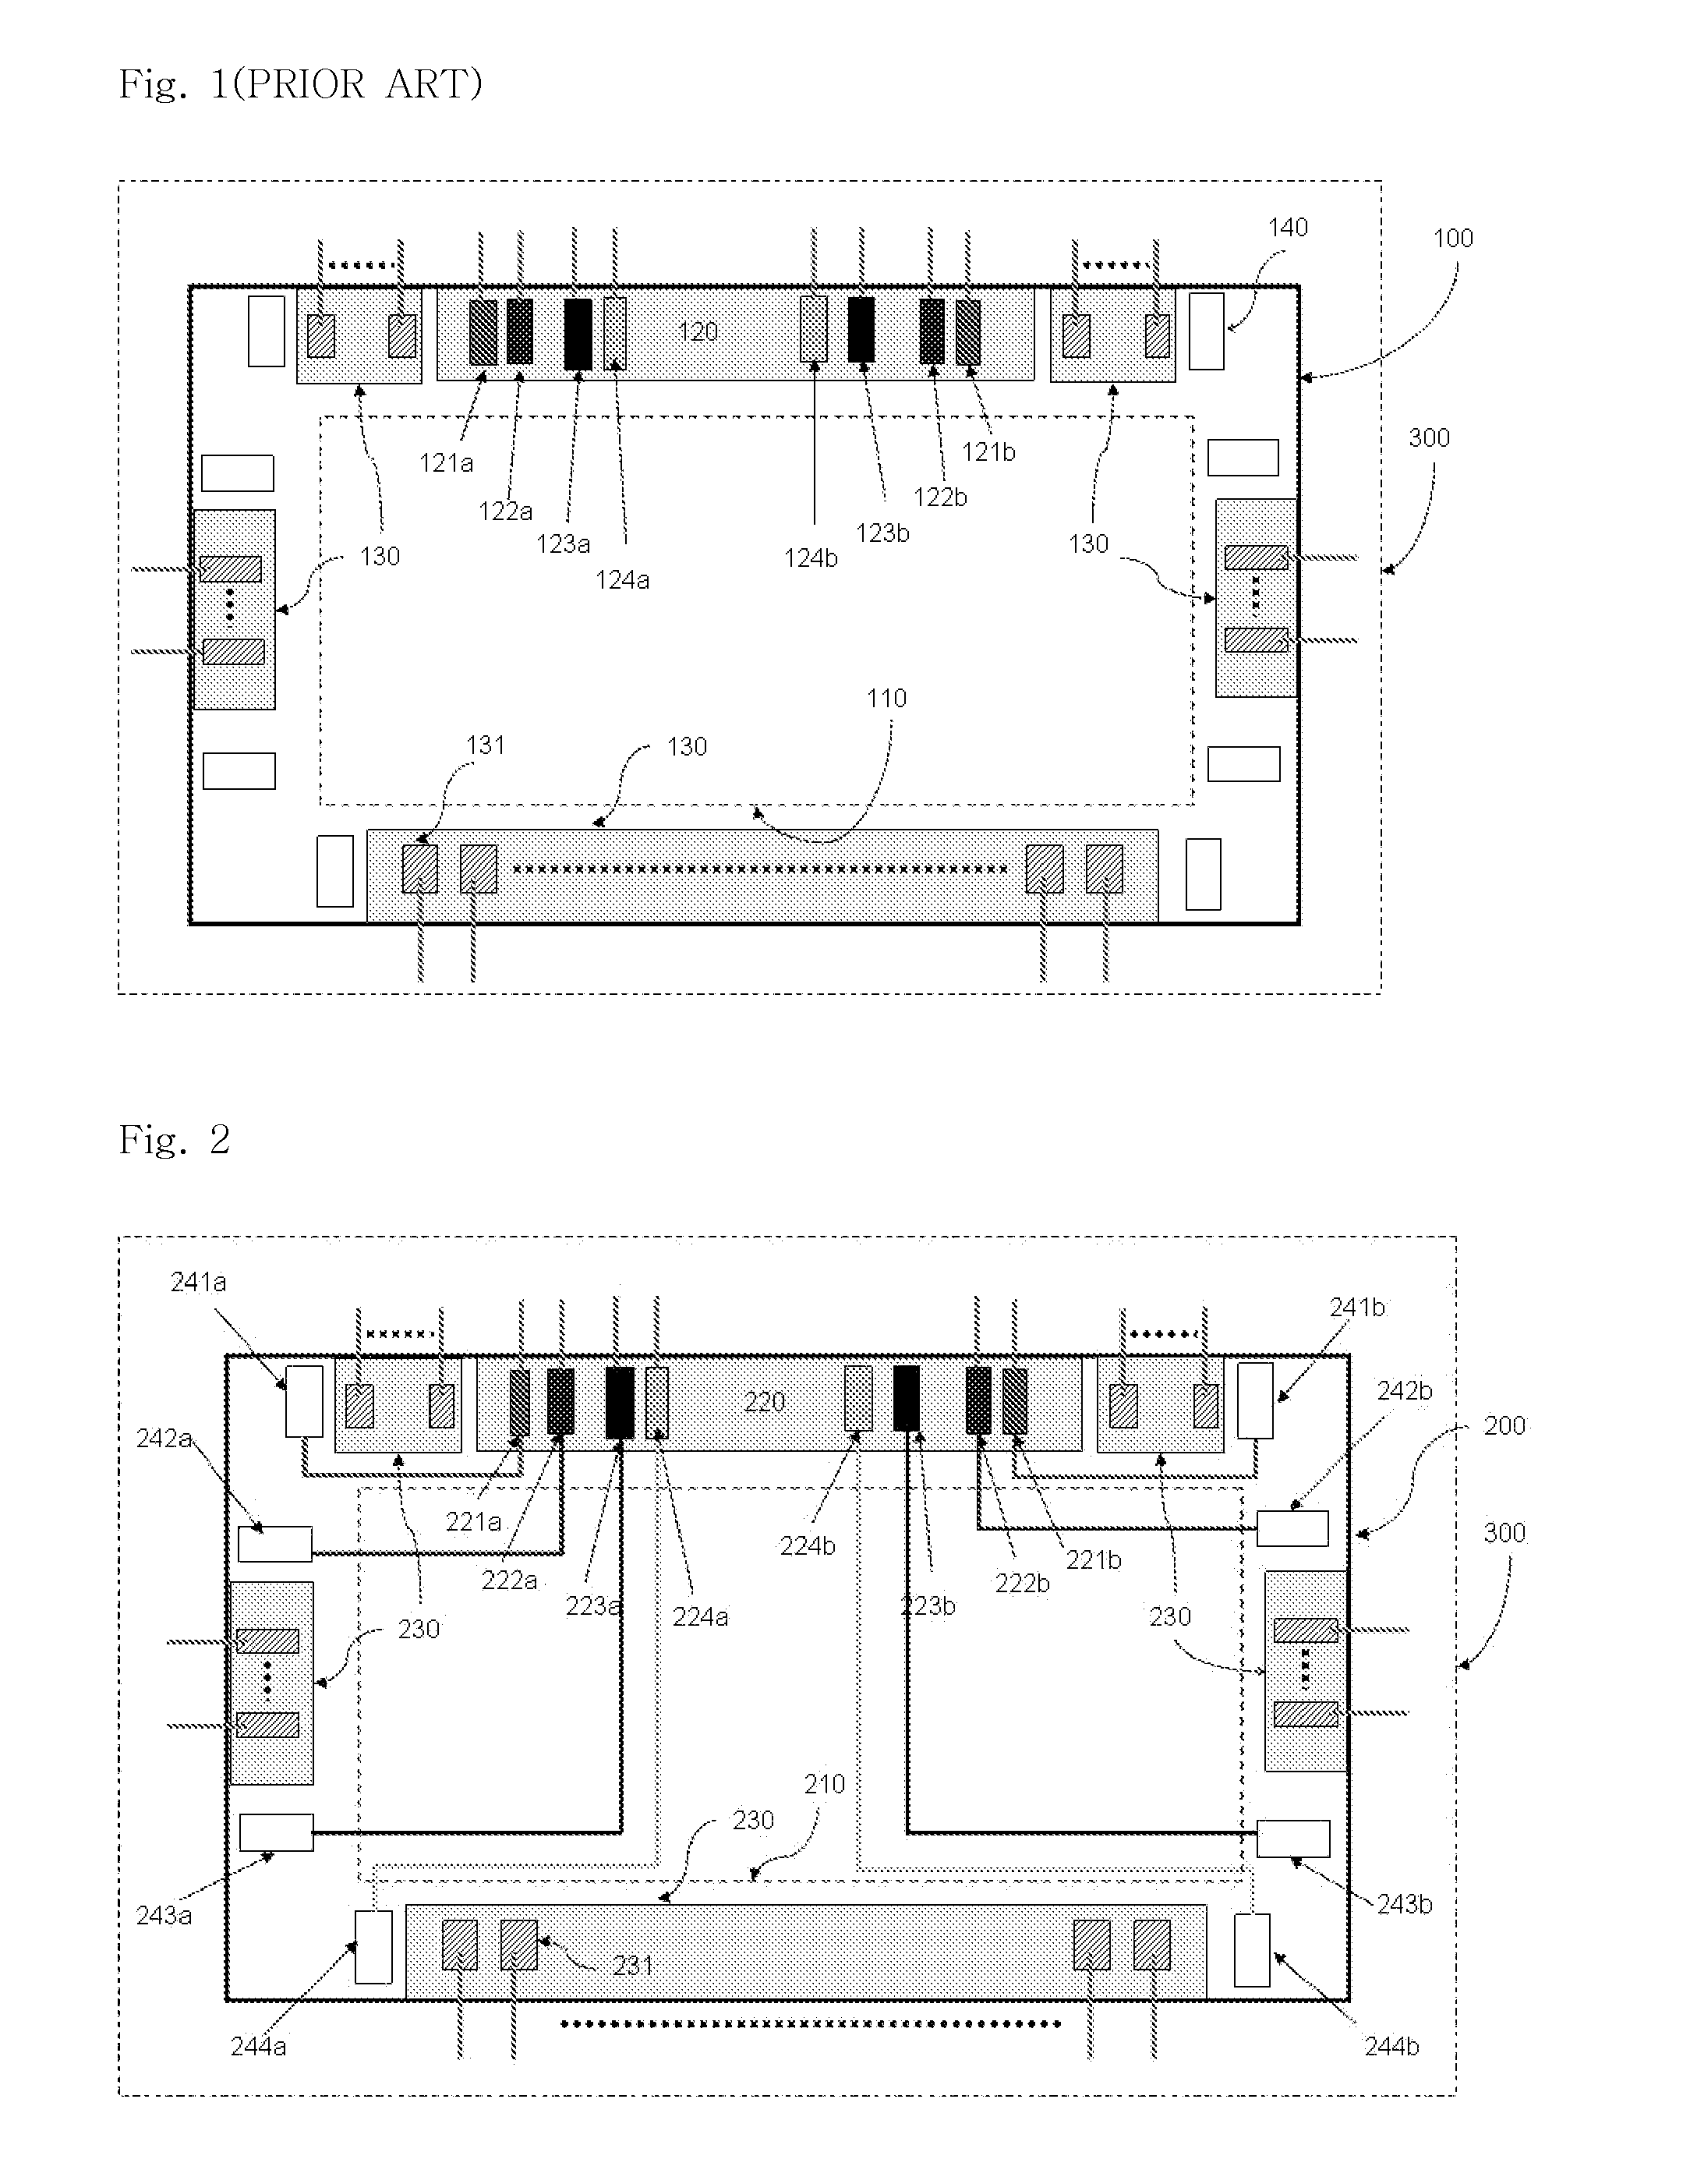 Pad layout structure of driver IC chip